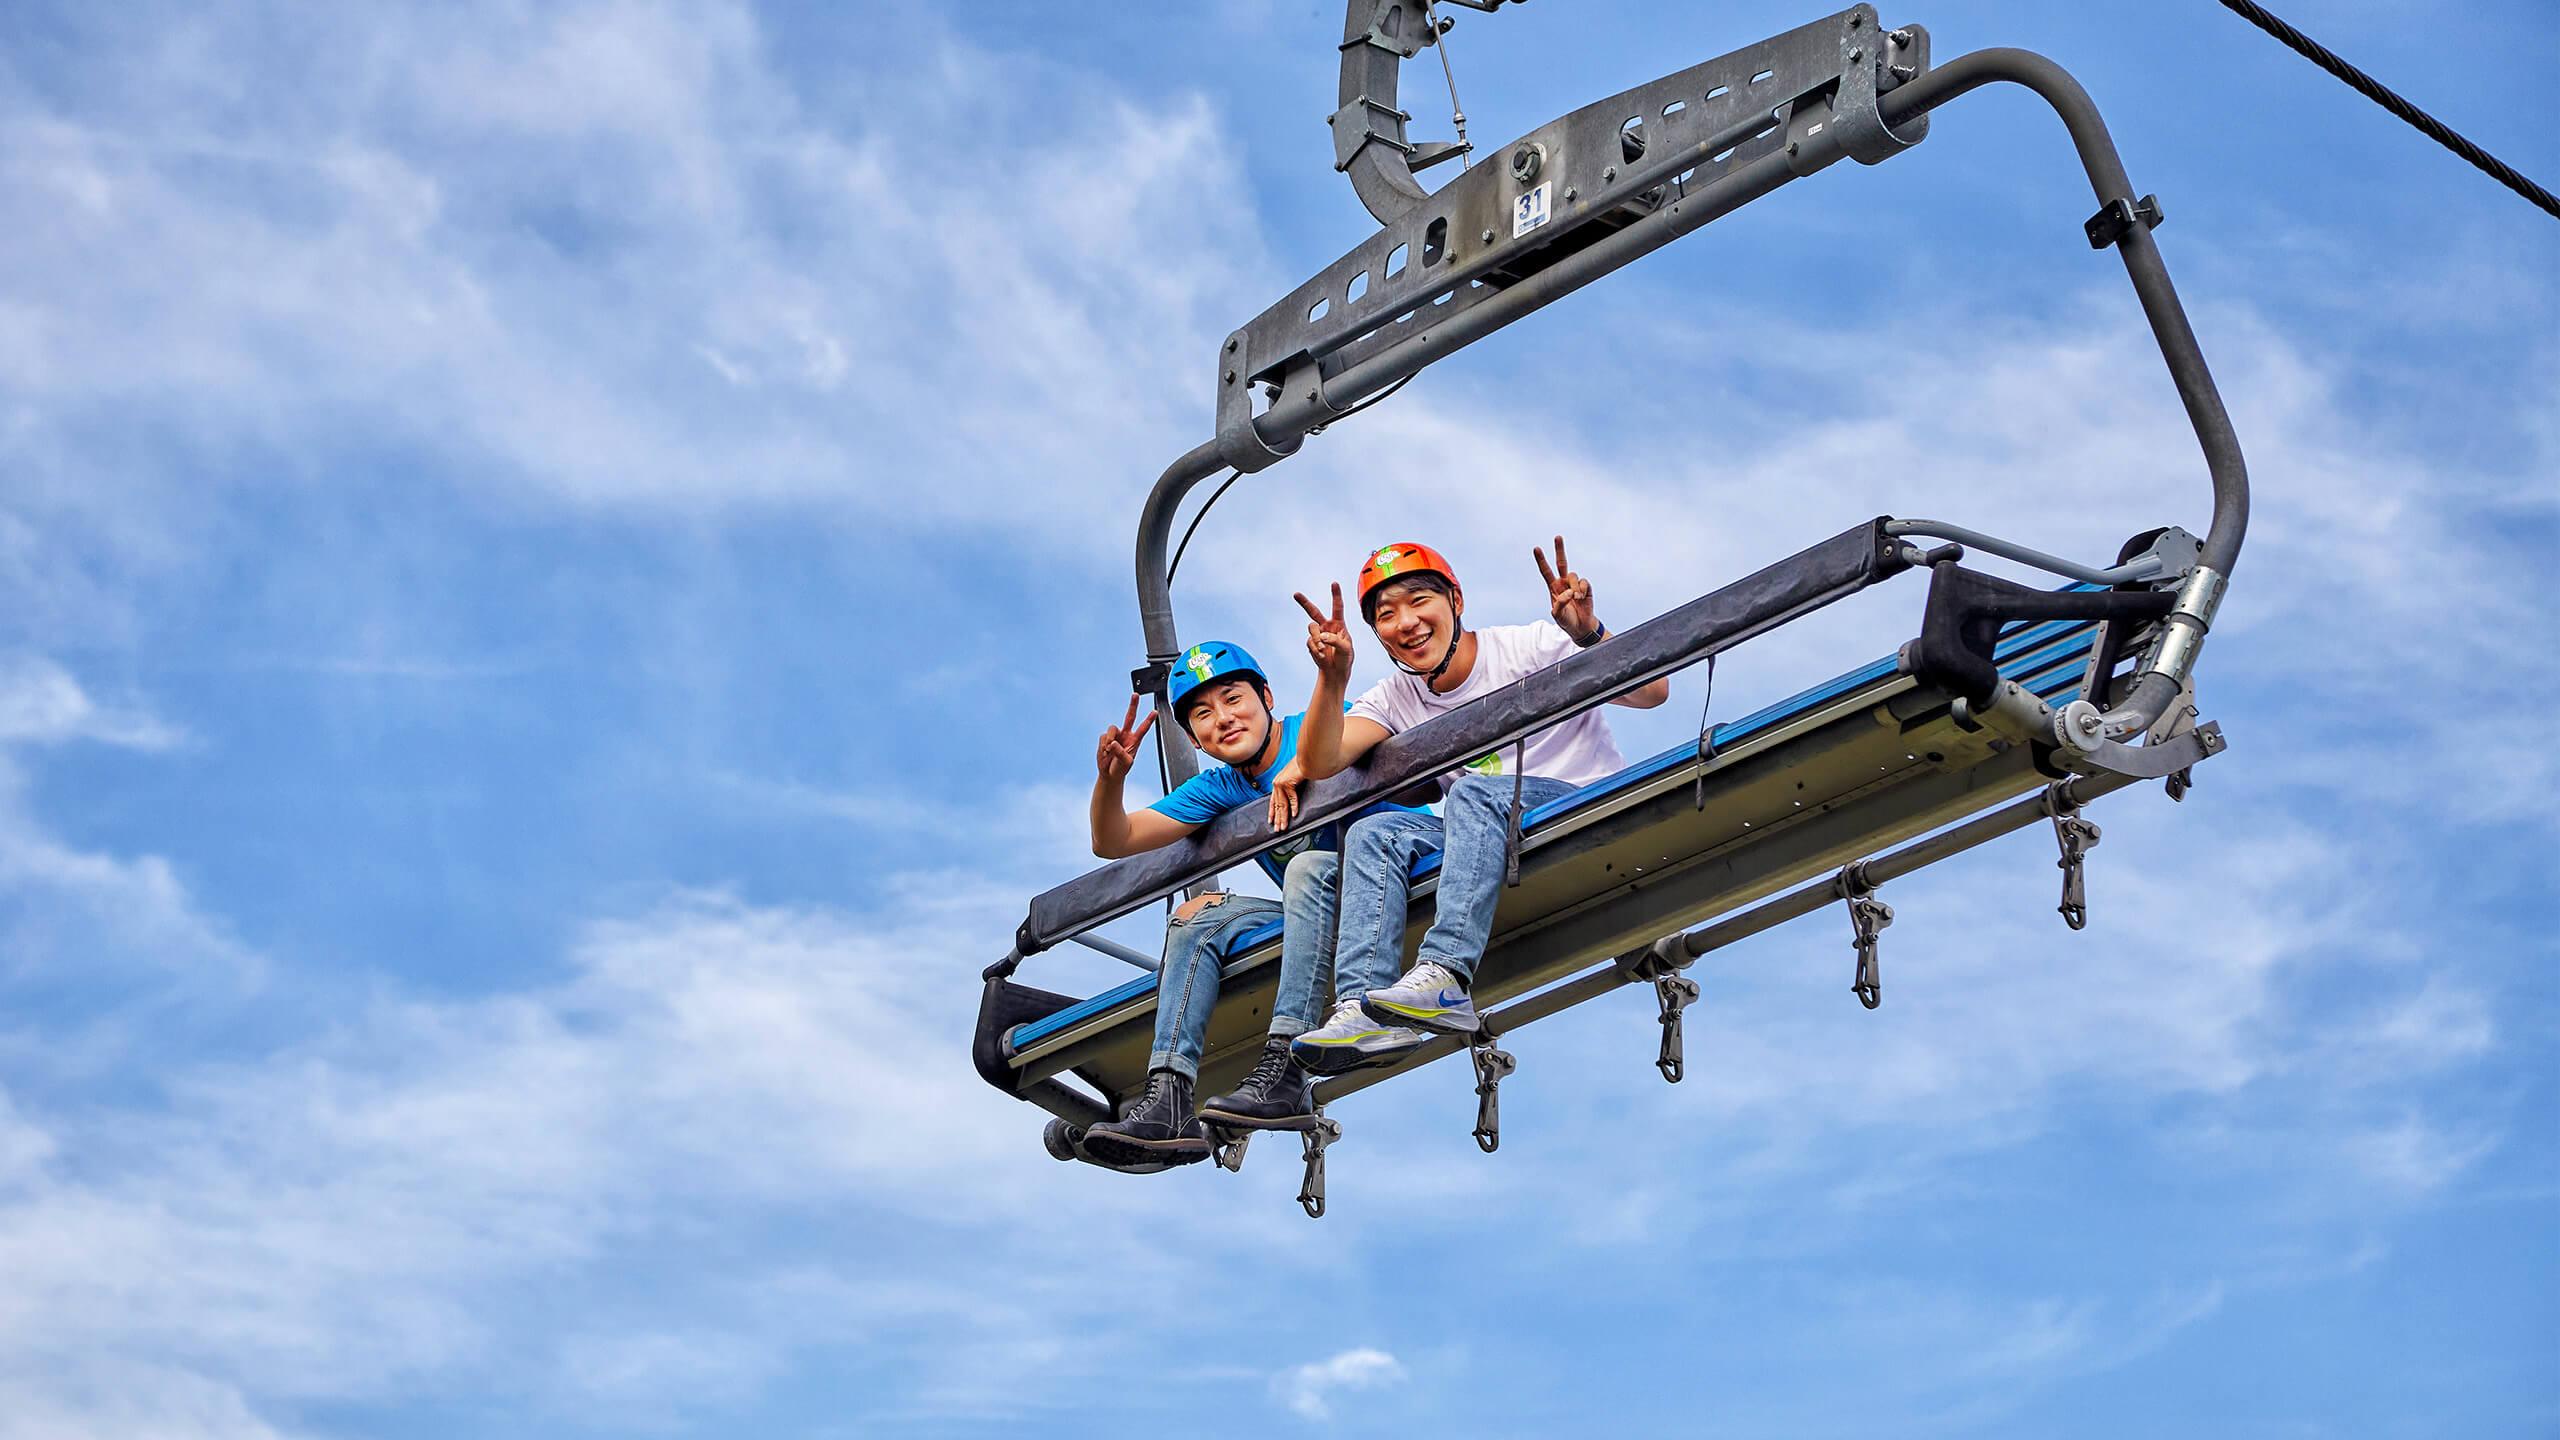 Two friends pull the peace sign whilst riding the Chairlift at Skyline Luge Tongyeong.